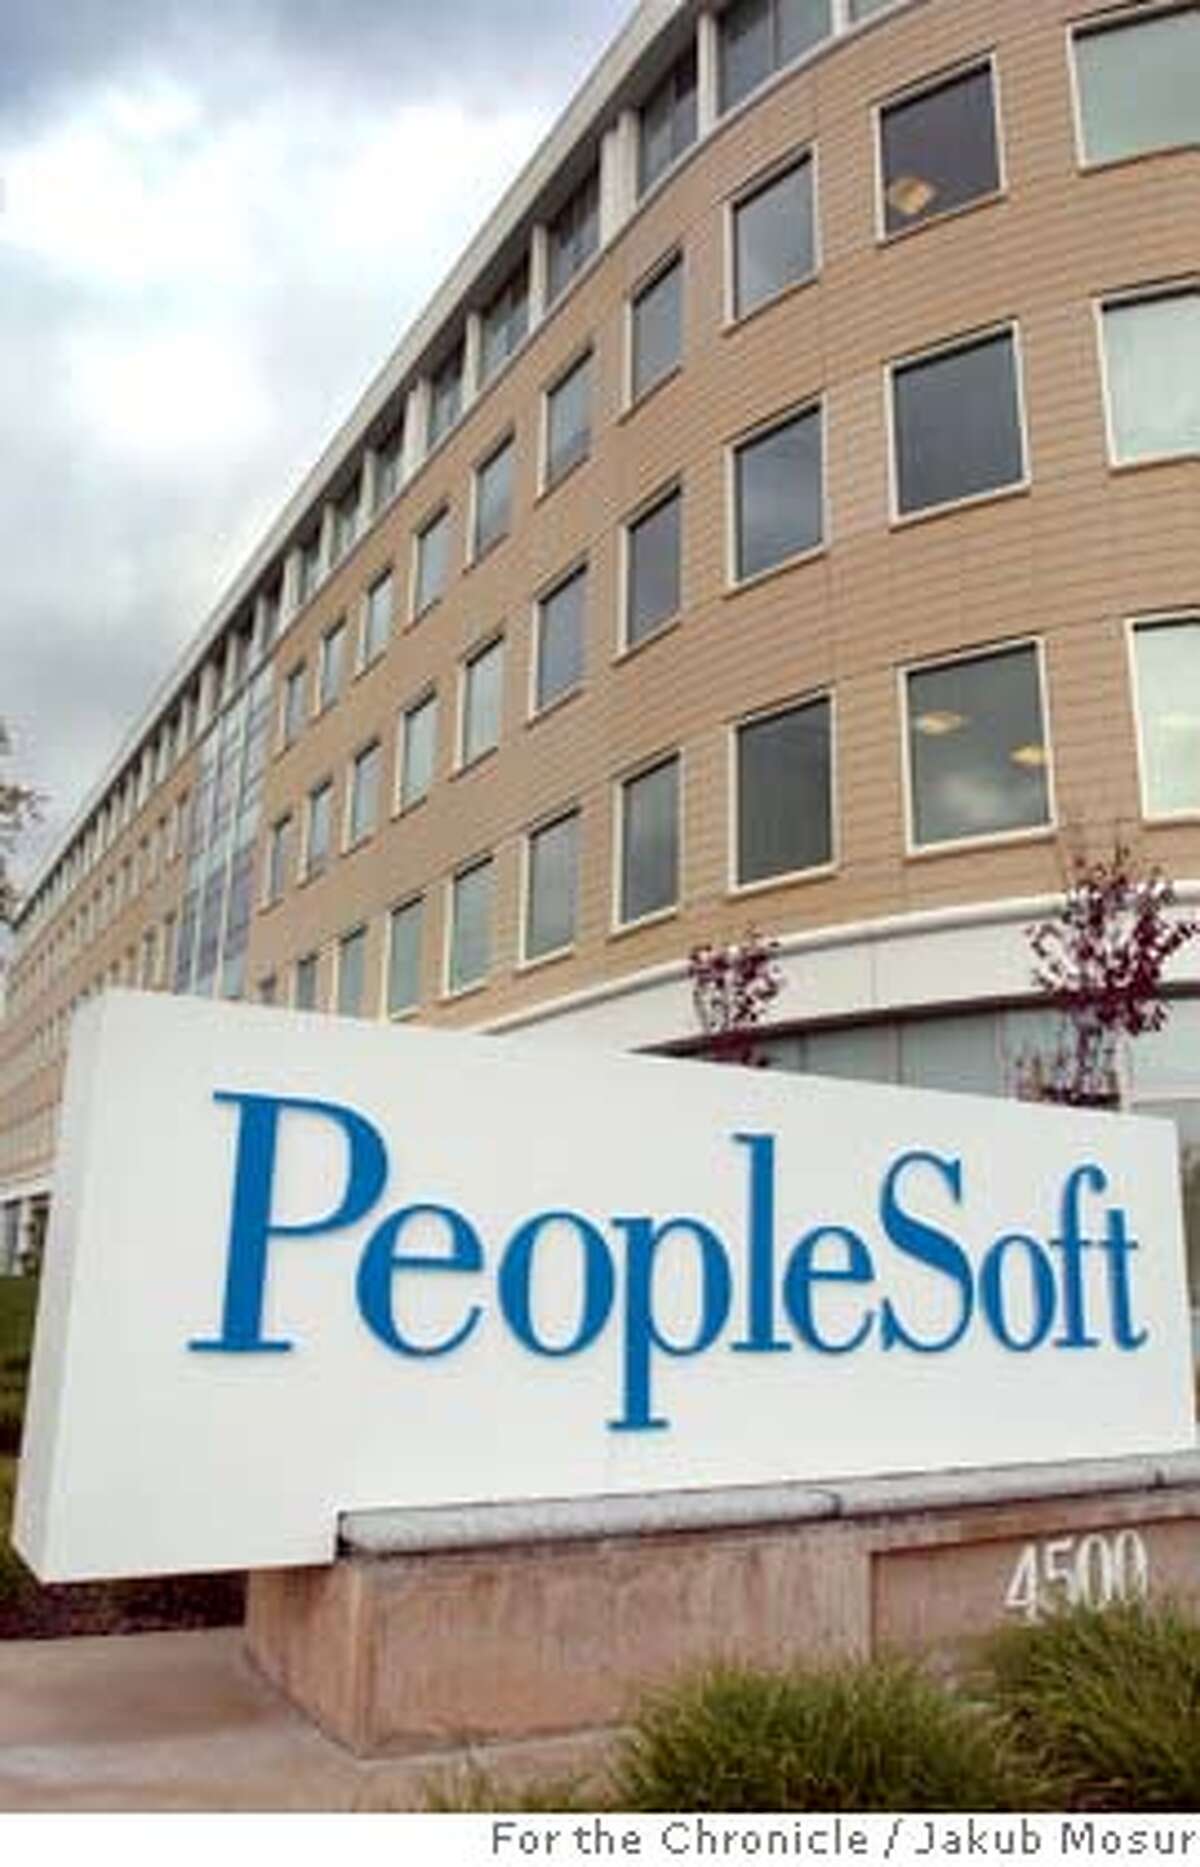 PEOPLESOFT_01.JPG A PeopleSoft sign at the company's headquarters in Pleasanton, Calif. after the business software maker accepted a sweetened $10.3 billion acquisition offer from rival Oracle Corp., ending a bitter, 18-month hostile takeover battle, on December 13, 2004. Event on 12/13/04 in Pleasanton. JAKUB MOSUR / The Chronicle MANDATORY CREDIT FOR PHOTOG AND SF CHRONICLE/ -MAGS OUT